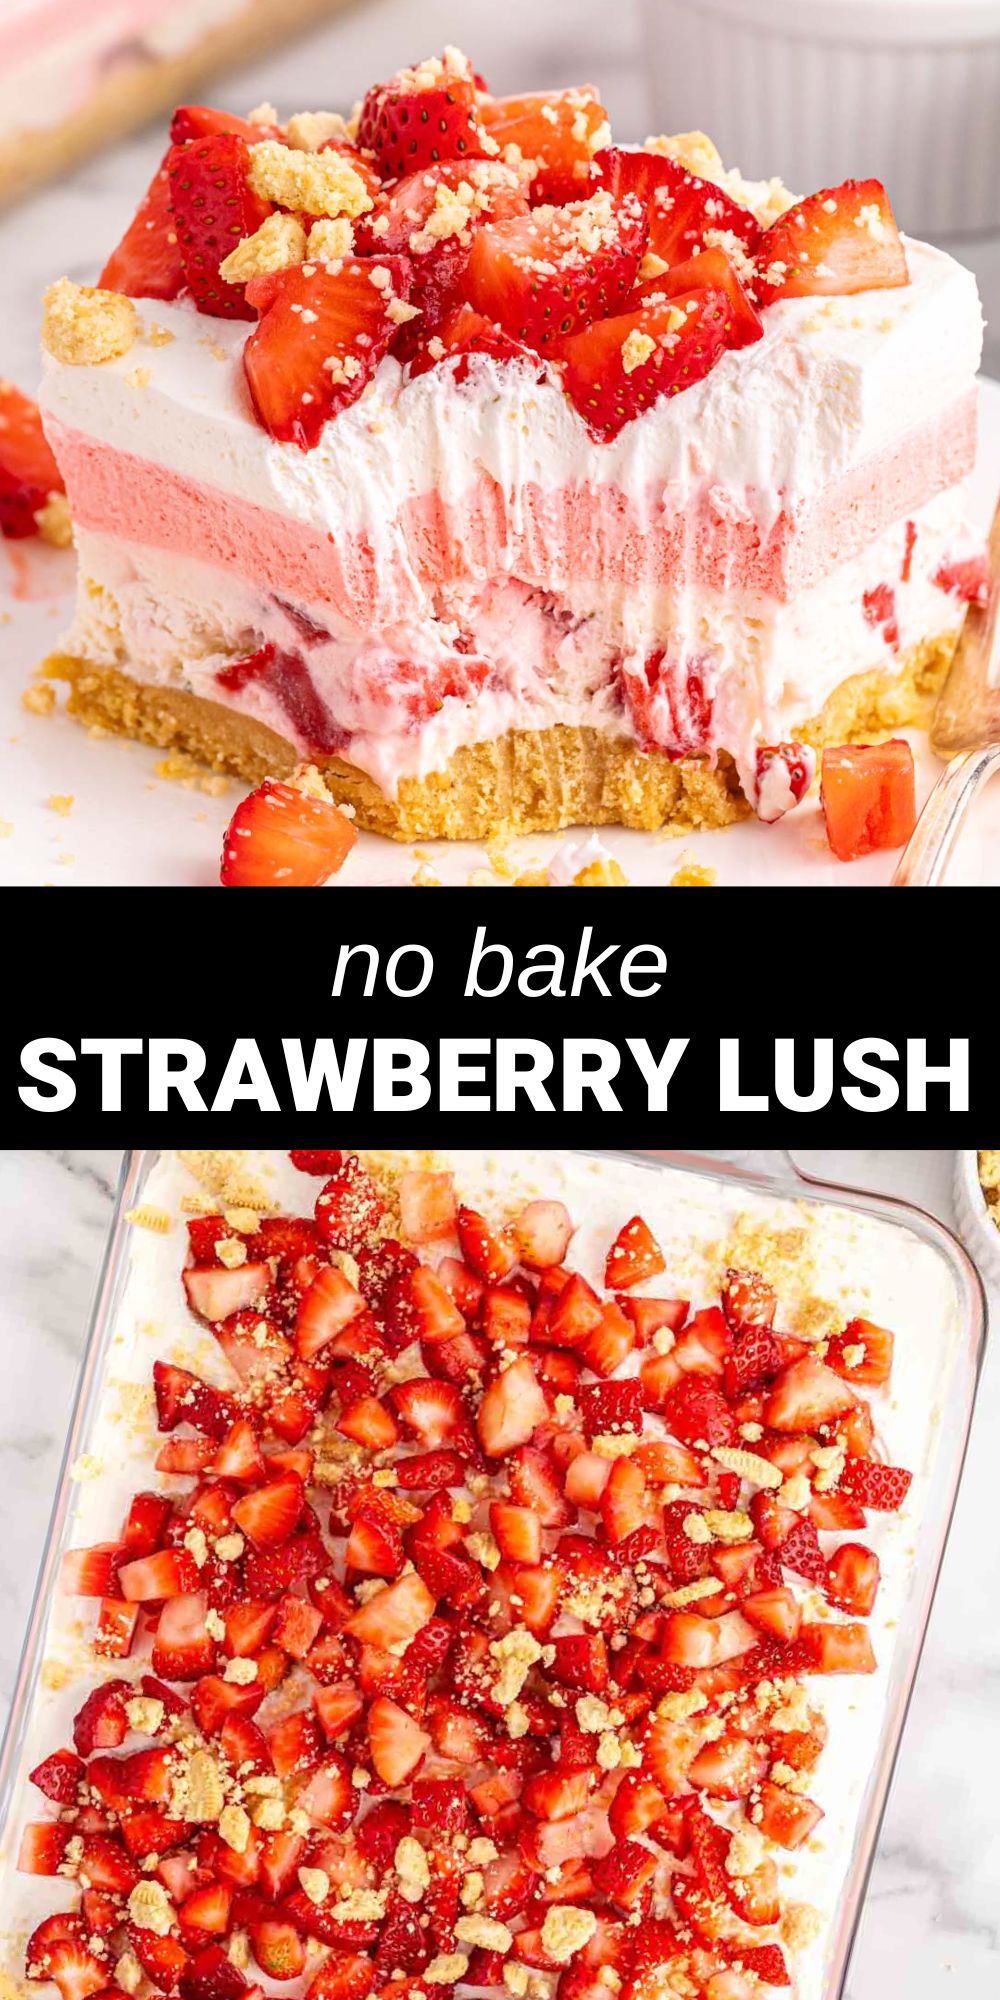 This cool and refreshing Strawberry Lush recipe has a homemade cookie crust with layers of decadent no-bake cheesecake, a fluffy strawberry Jello mixture, and a whipped cream topping. This dessert is so delicious and satisfying that you'll look forward to making it any time of the year. 